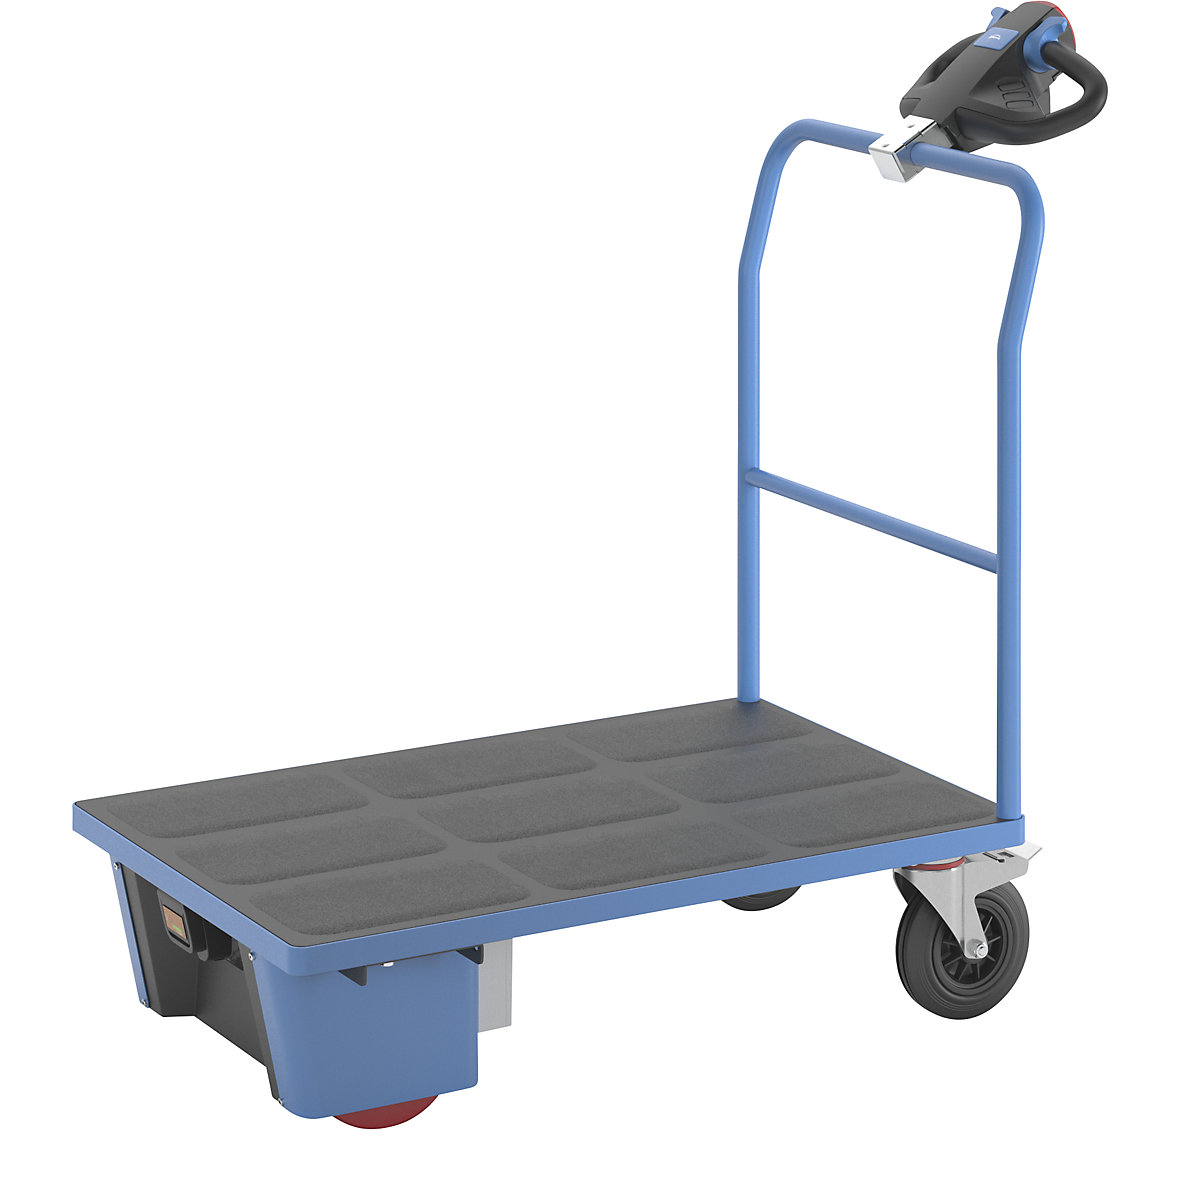 Platform truck with electric drive – eurokraft pro, tubular push handle, LxWxH 1370 x 700 x 1300 mm, solid rubber tyres-16